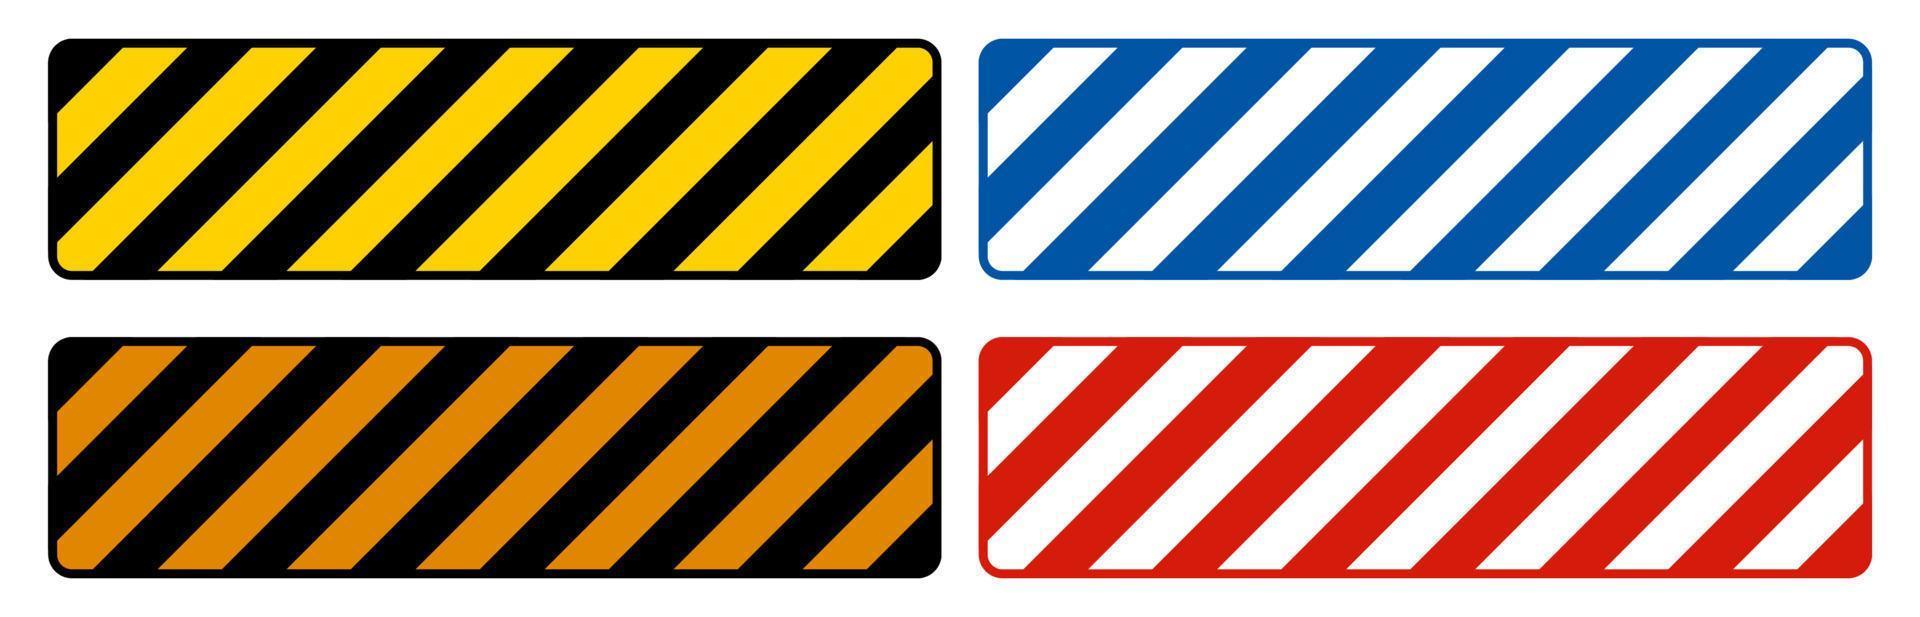 Yellow,Red,Grey,Blue Black Striped Floor Sign On White background vector